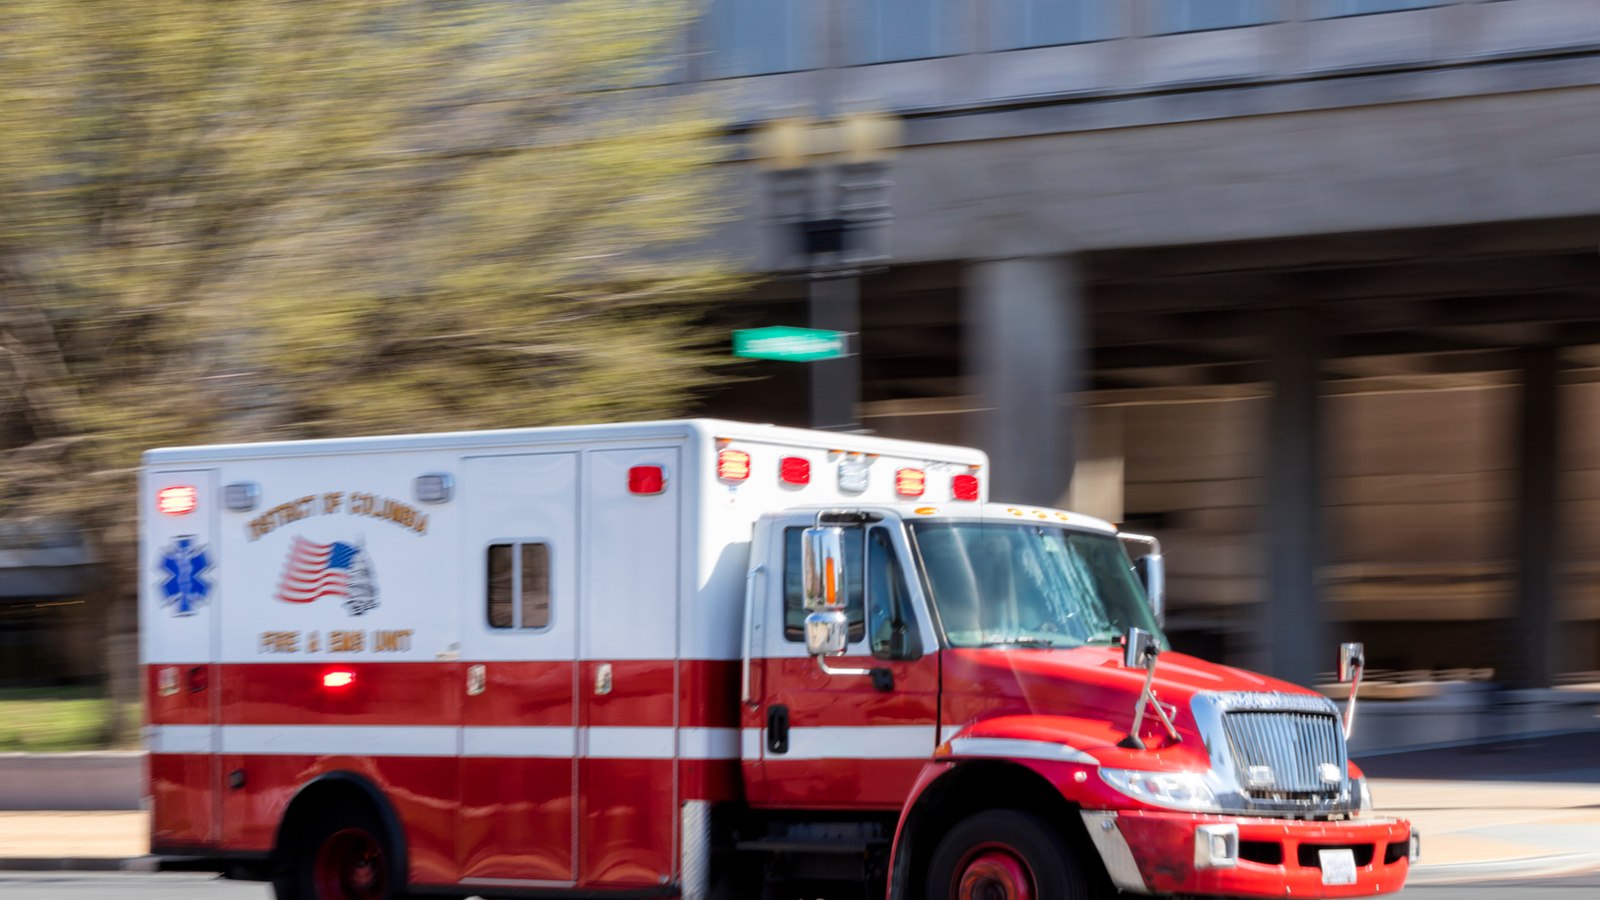 A Hidden Gem In The Cares Act That Benefits Ambulance Services